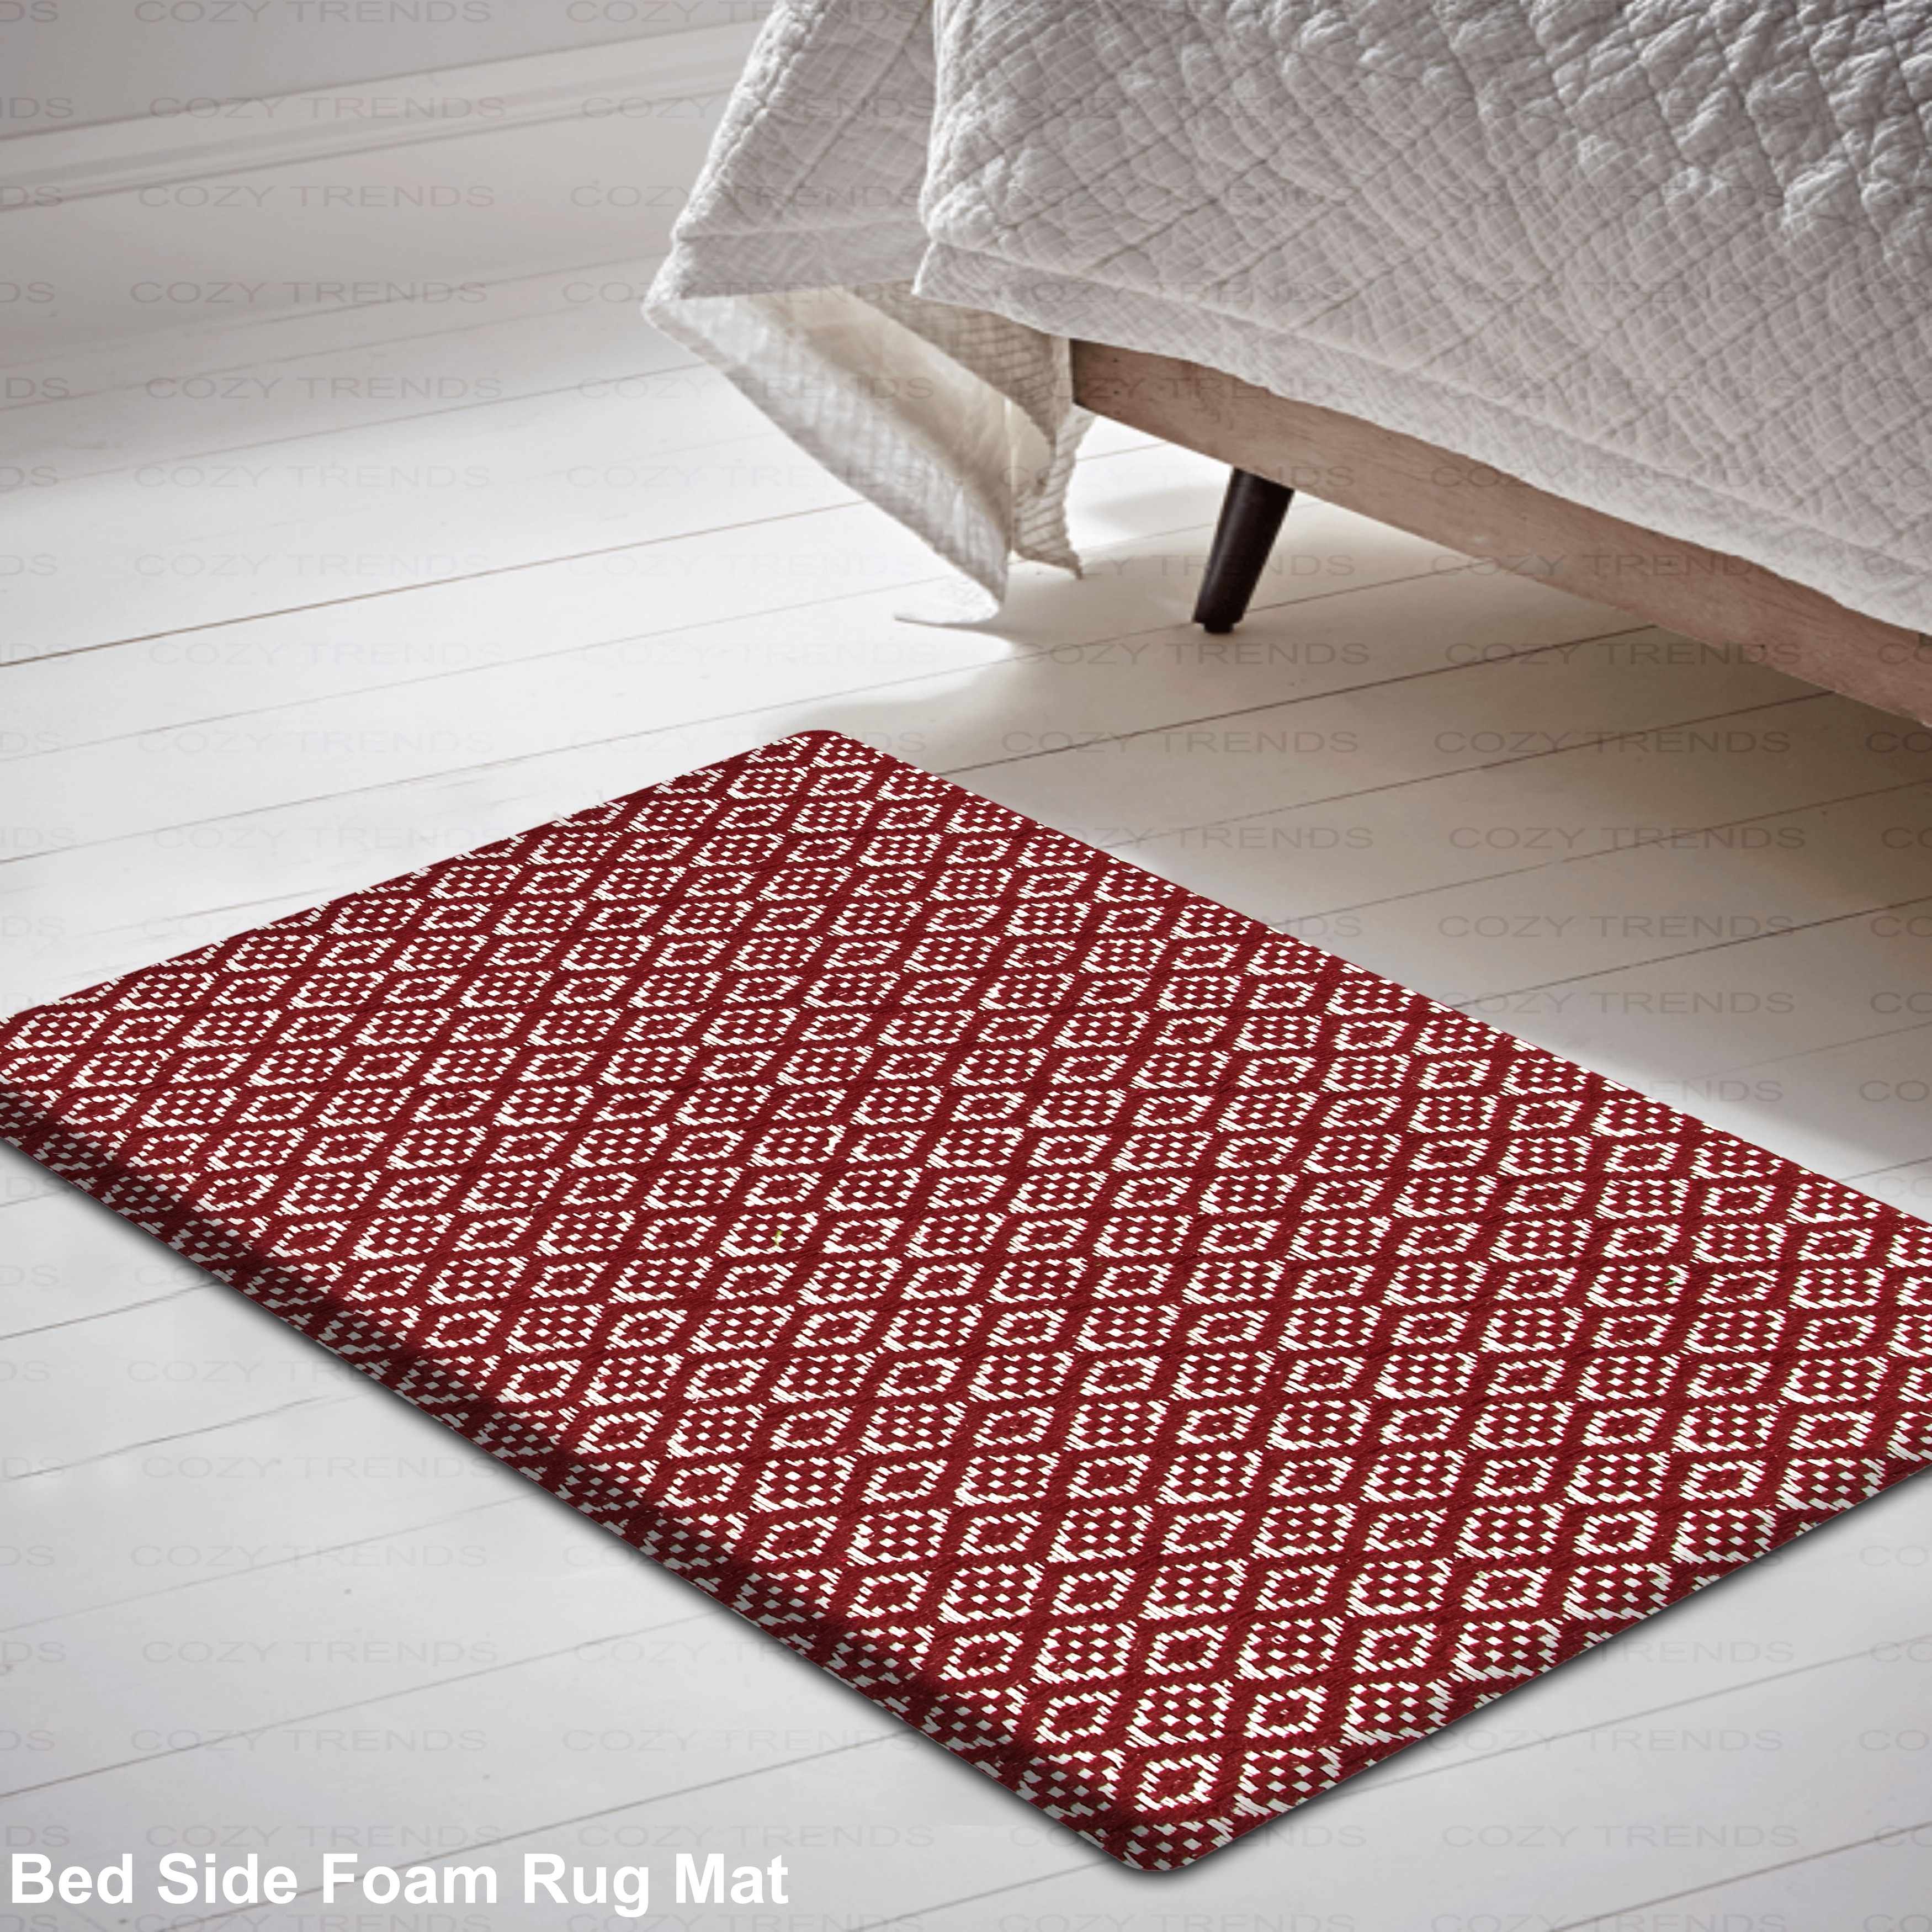 https://ak1.ostkcdn.com/images/products/is/images/direct/f04ae65a7ae6bbb5e5a3cd2ae104f8a76e160652/Cotton-Kitchen-Mat-Cushioned-Anti-Fatigue-Rug%2C-Non-Slip-Mats-Comfort-Foam-Rug-for-Kitchen%2C-Office%2C-Sink%2C-Laundry---18%27%27x30%27%27.jpg